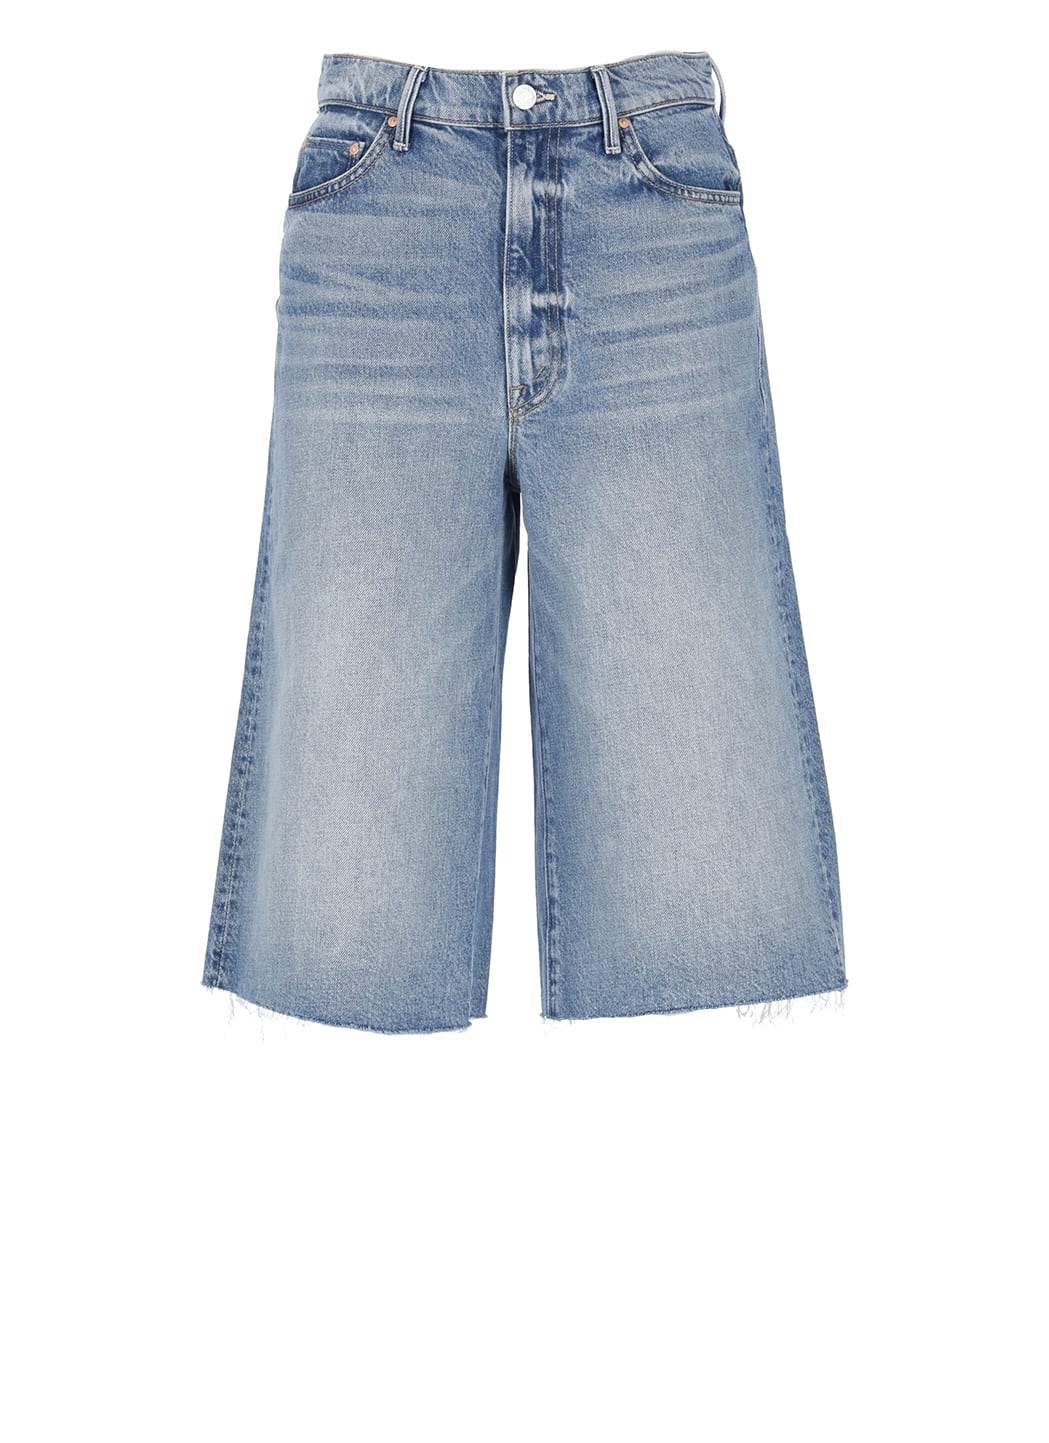 MOTHER THE UNDERCOVER SHORT FRAY BERMUDA SHORTS